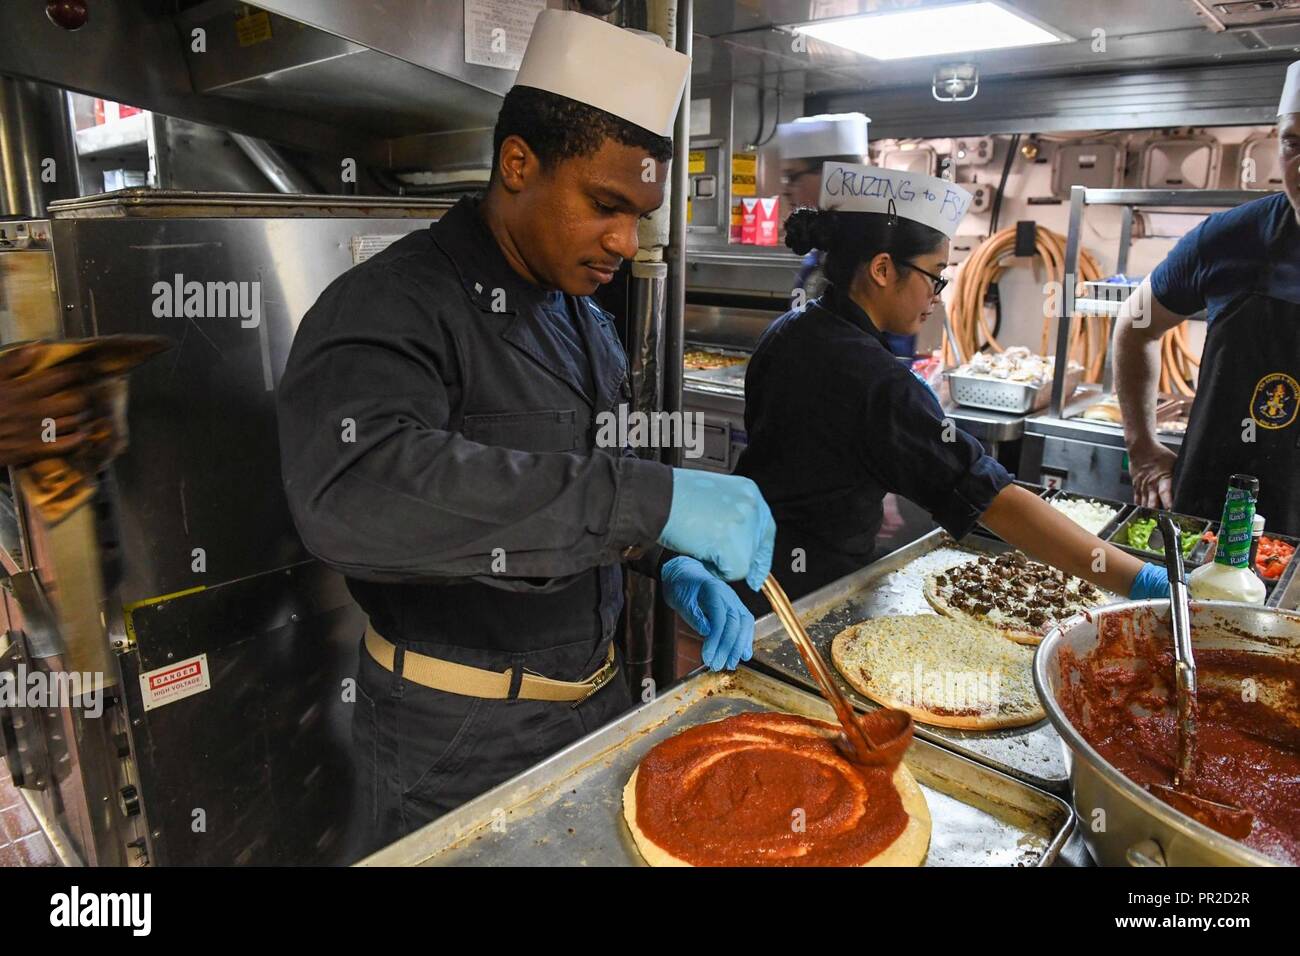 ATLANTIC OCEAN (July 22, 2017) - Lt. j.g. Reuben Carson, from Birmingham, Alabama, left, and Lt. j.g. Joanna Cruz, from Lorton, Virgina,  middle, make pizzas aboard the Arleigh Burke-class guided-missile destroyer USS James E. Williams (DDG 95) July 22, 2017. James E. Williams, home-ported in Norfolk, is on a routine deployment to the U.S. 6th Fleet area of operations in support of U.S. national security interests in Europe. Stock Photo